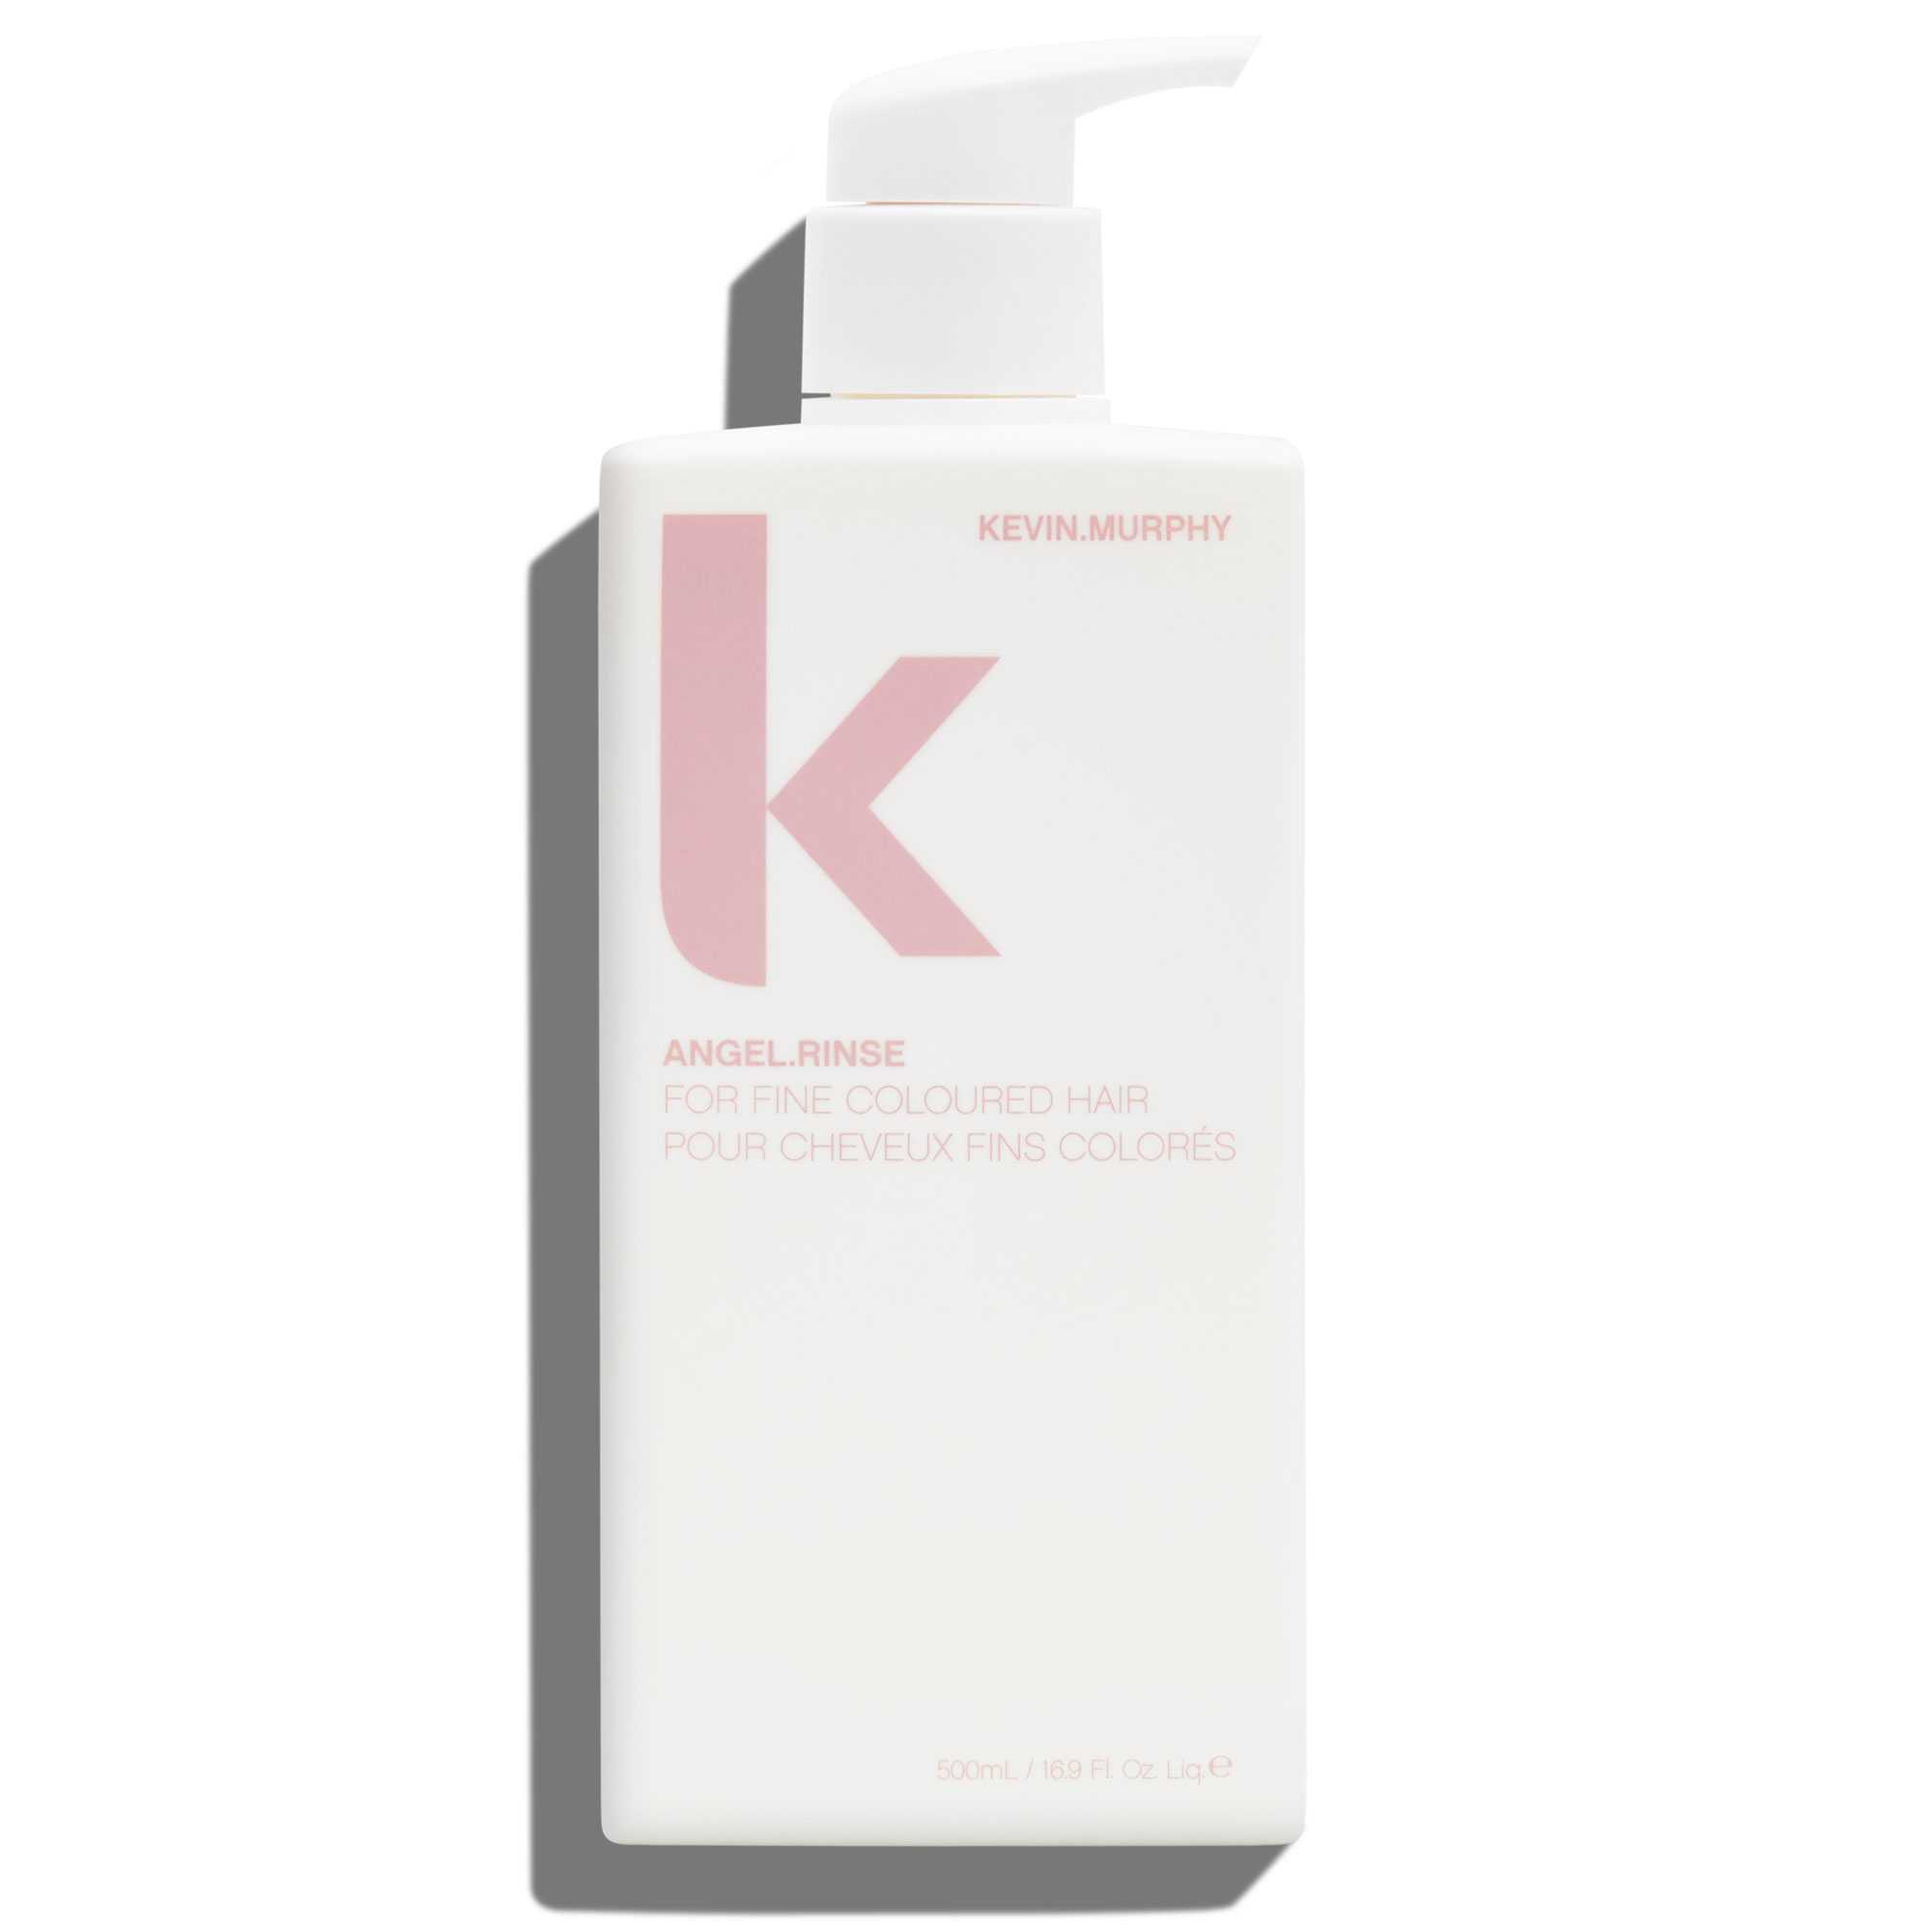 KEVIN.MURPHY ANGEL.RINSE (Limited Edition)